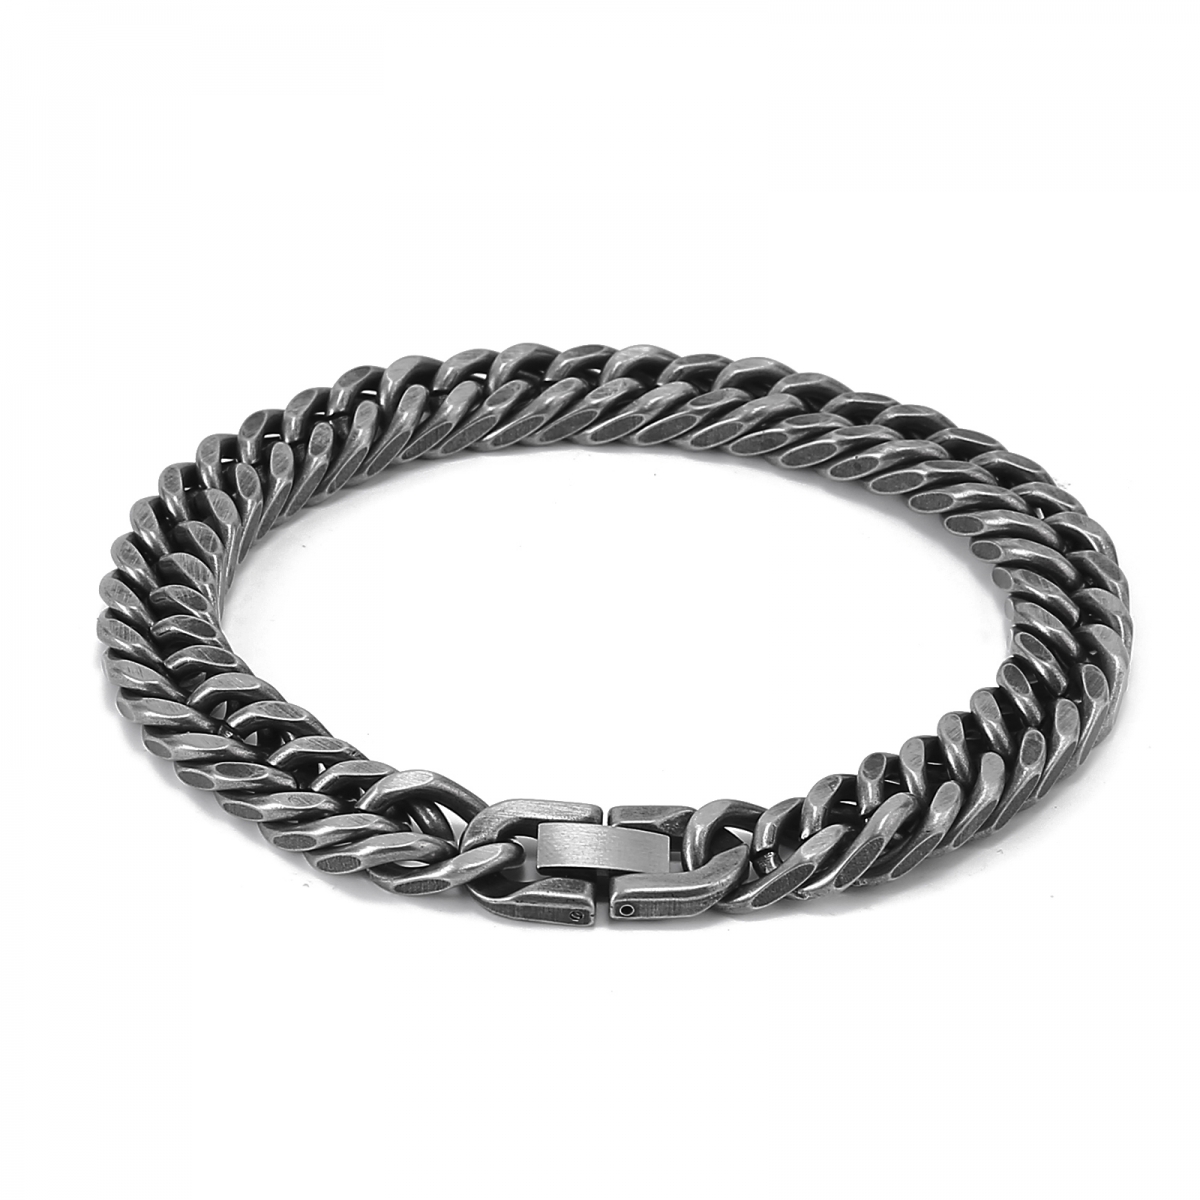 Antique Link Chain Bracelet 8mm US$3.8/PC-NORSECOLLECTION- Viking Jewelry,Viking Necklace,Viking Bracelet,Viking Rings,Viking Mugs,Viking Accessories,Viking Crafts